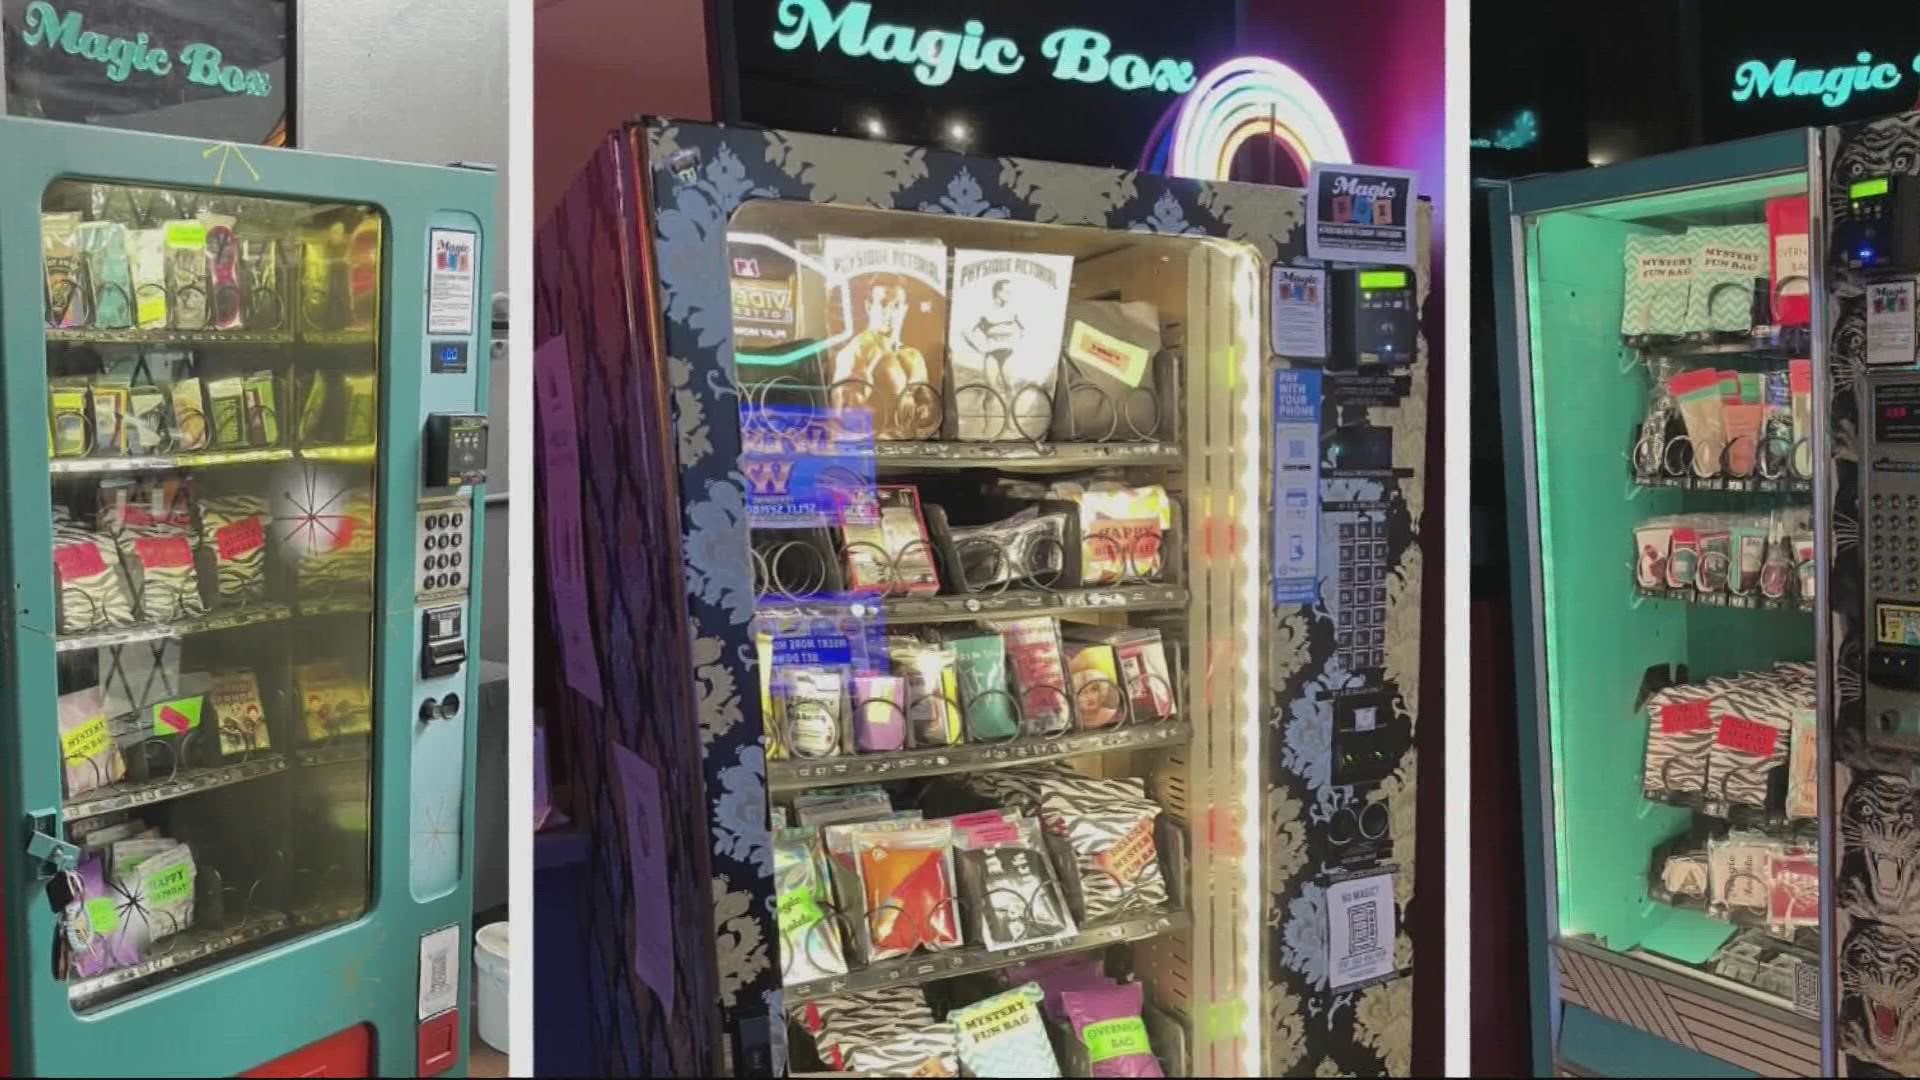 Cari Carter has 13 pop-up vending machines around the city where she sells vintage books, unusual jewelry and more.